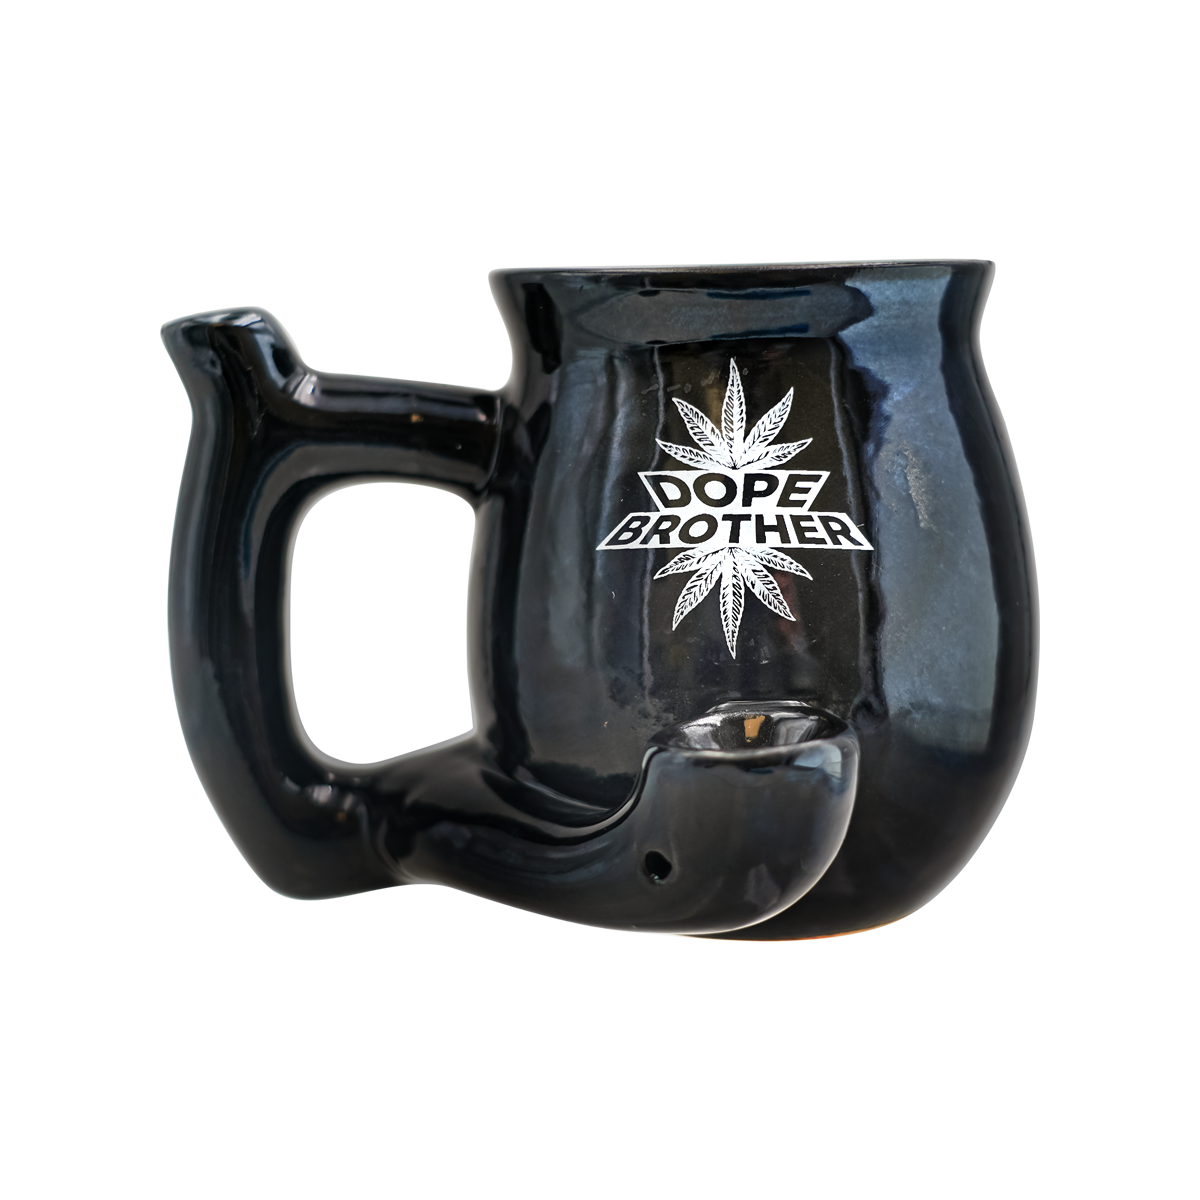 &quot;Dope Brother&quot; Mug Pipe